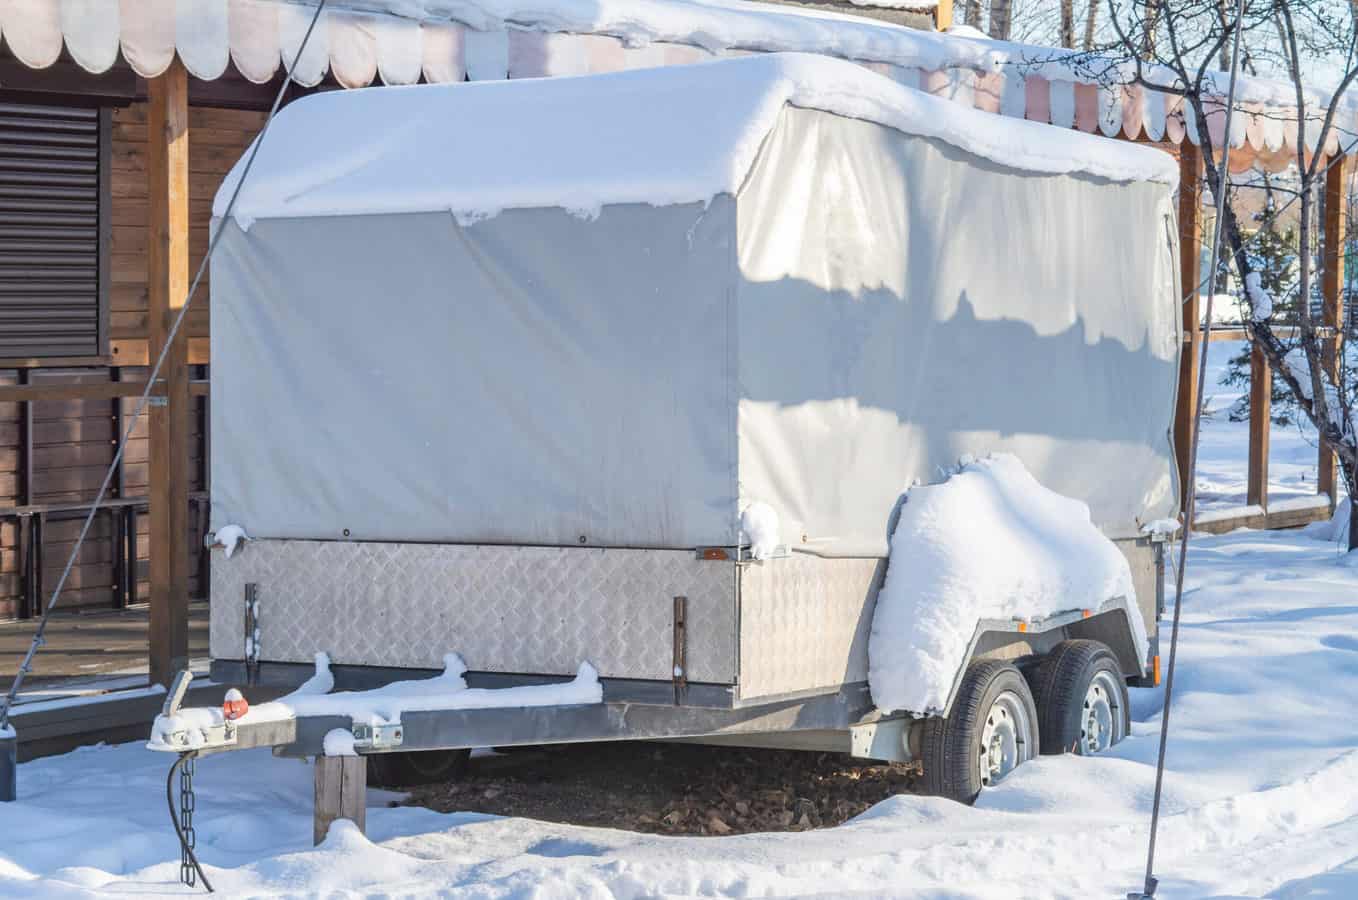 RV cover for snow and wind on trailer